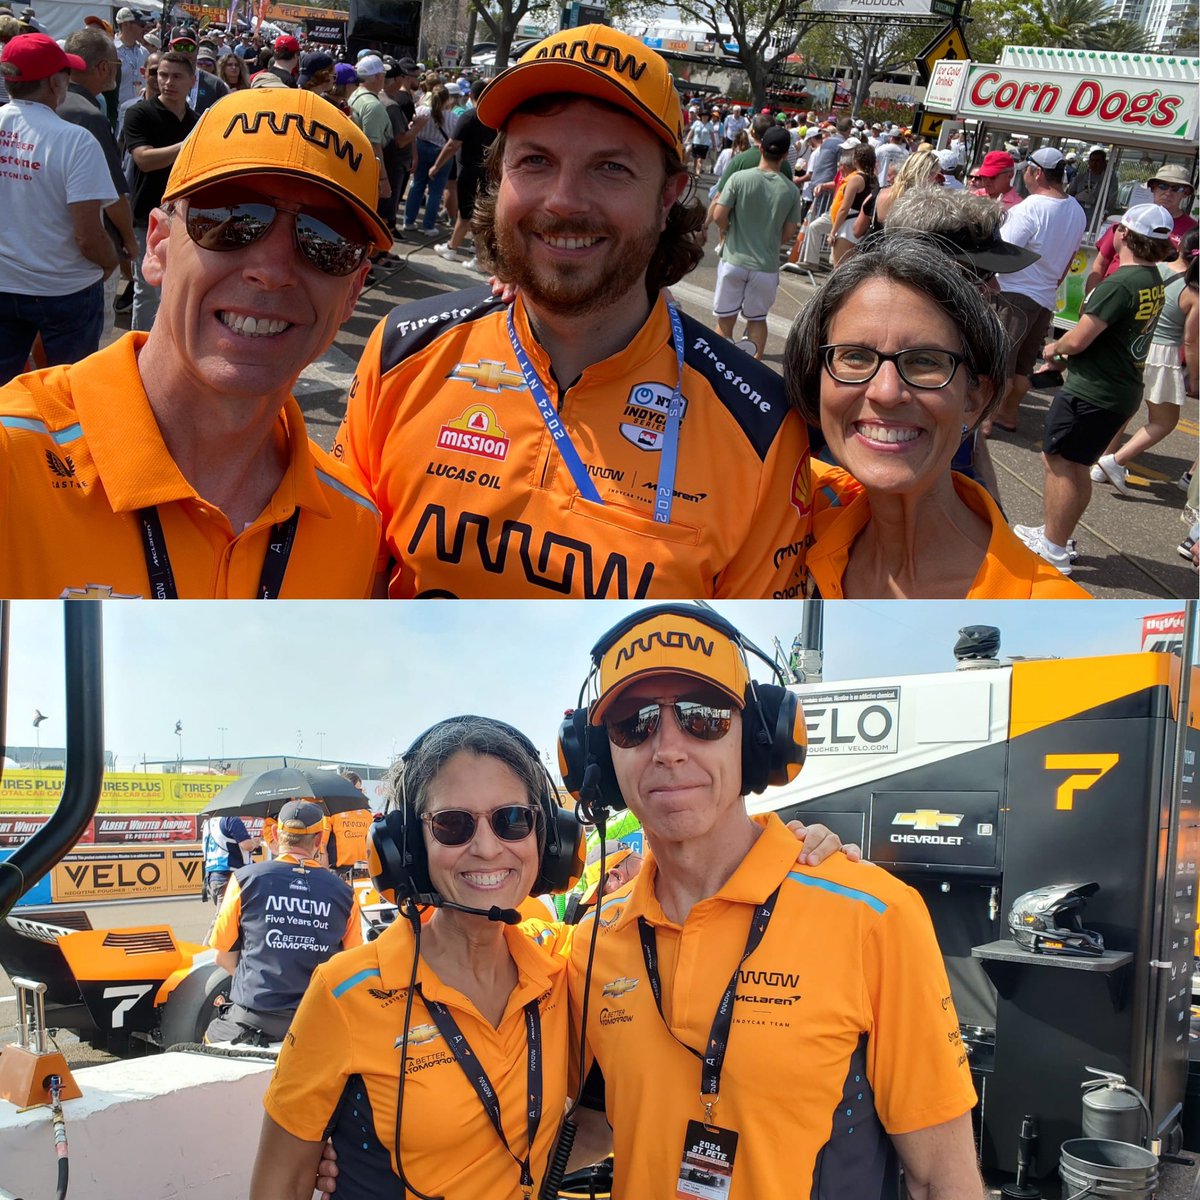 Thank you, to Gavin Ward and ArrowMcLaren for giving @IndiraFeustel and I the opportunity to be with you all #gpstpete.